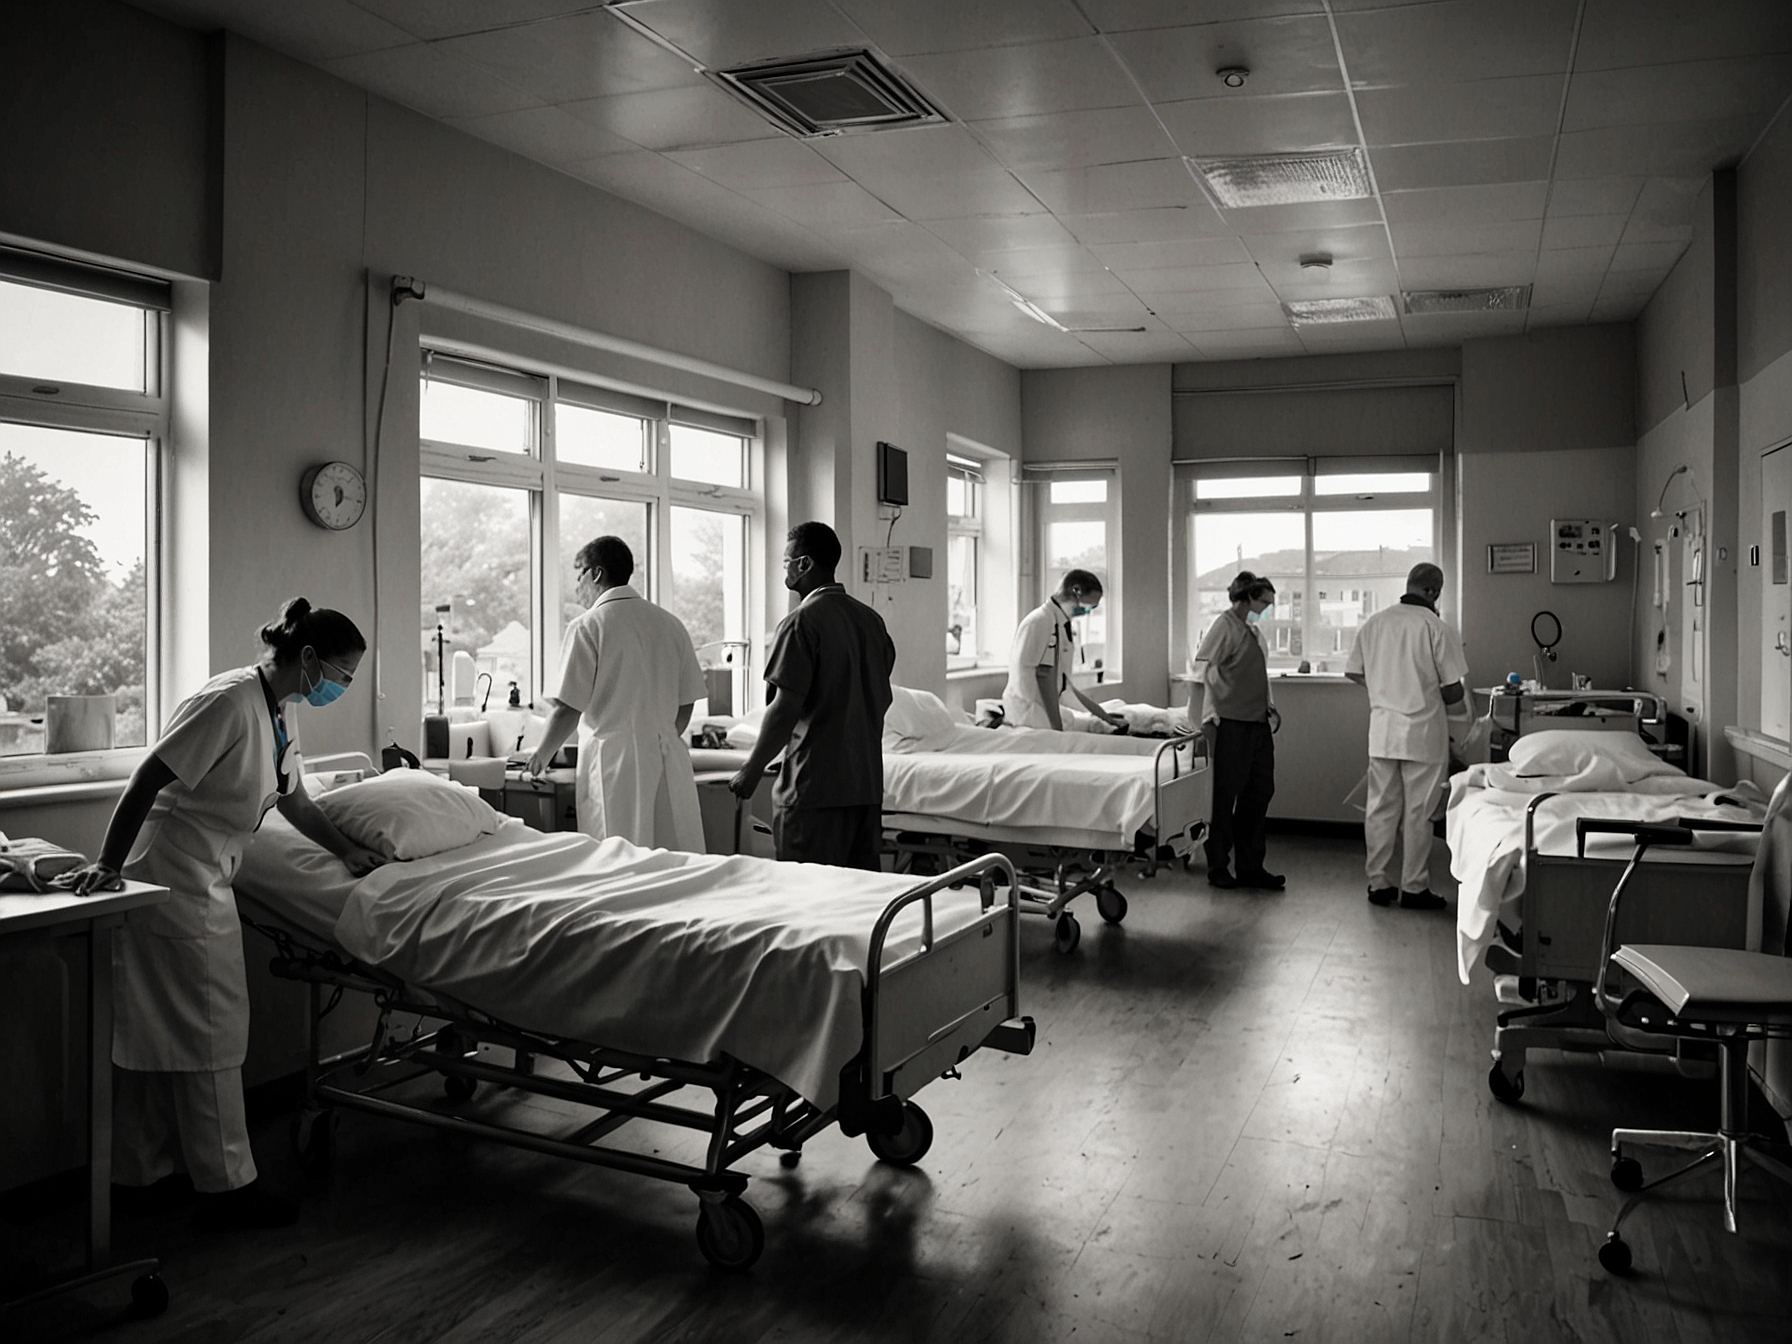 A busy hospital ward with exhausted healthcare workers attending to numerous patients. The image illustrates the immense pressure on the NHS amid economic struggles and rising patient numbers.